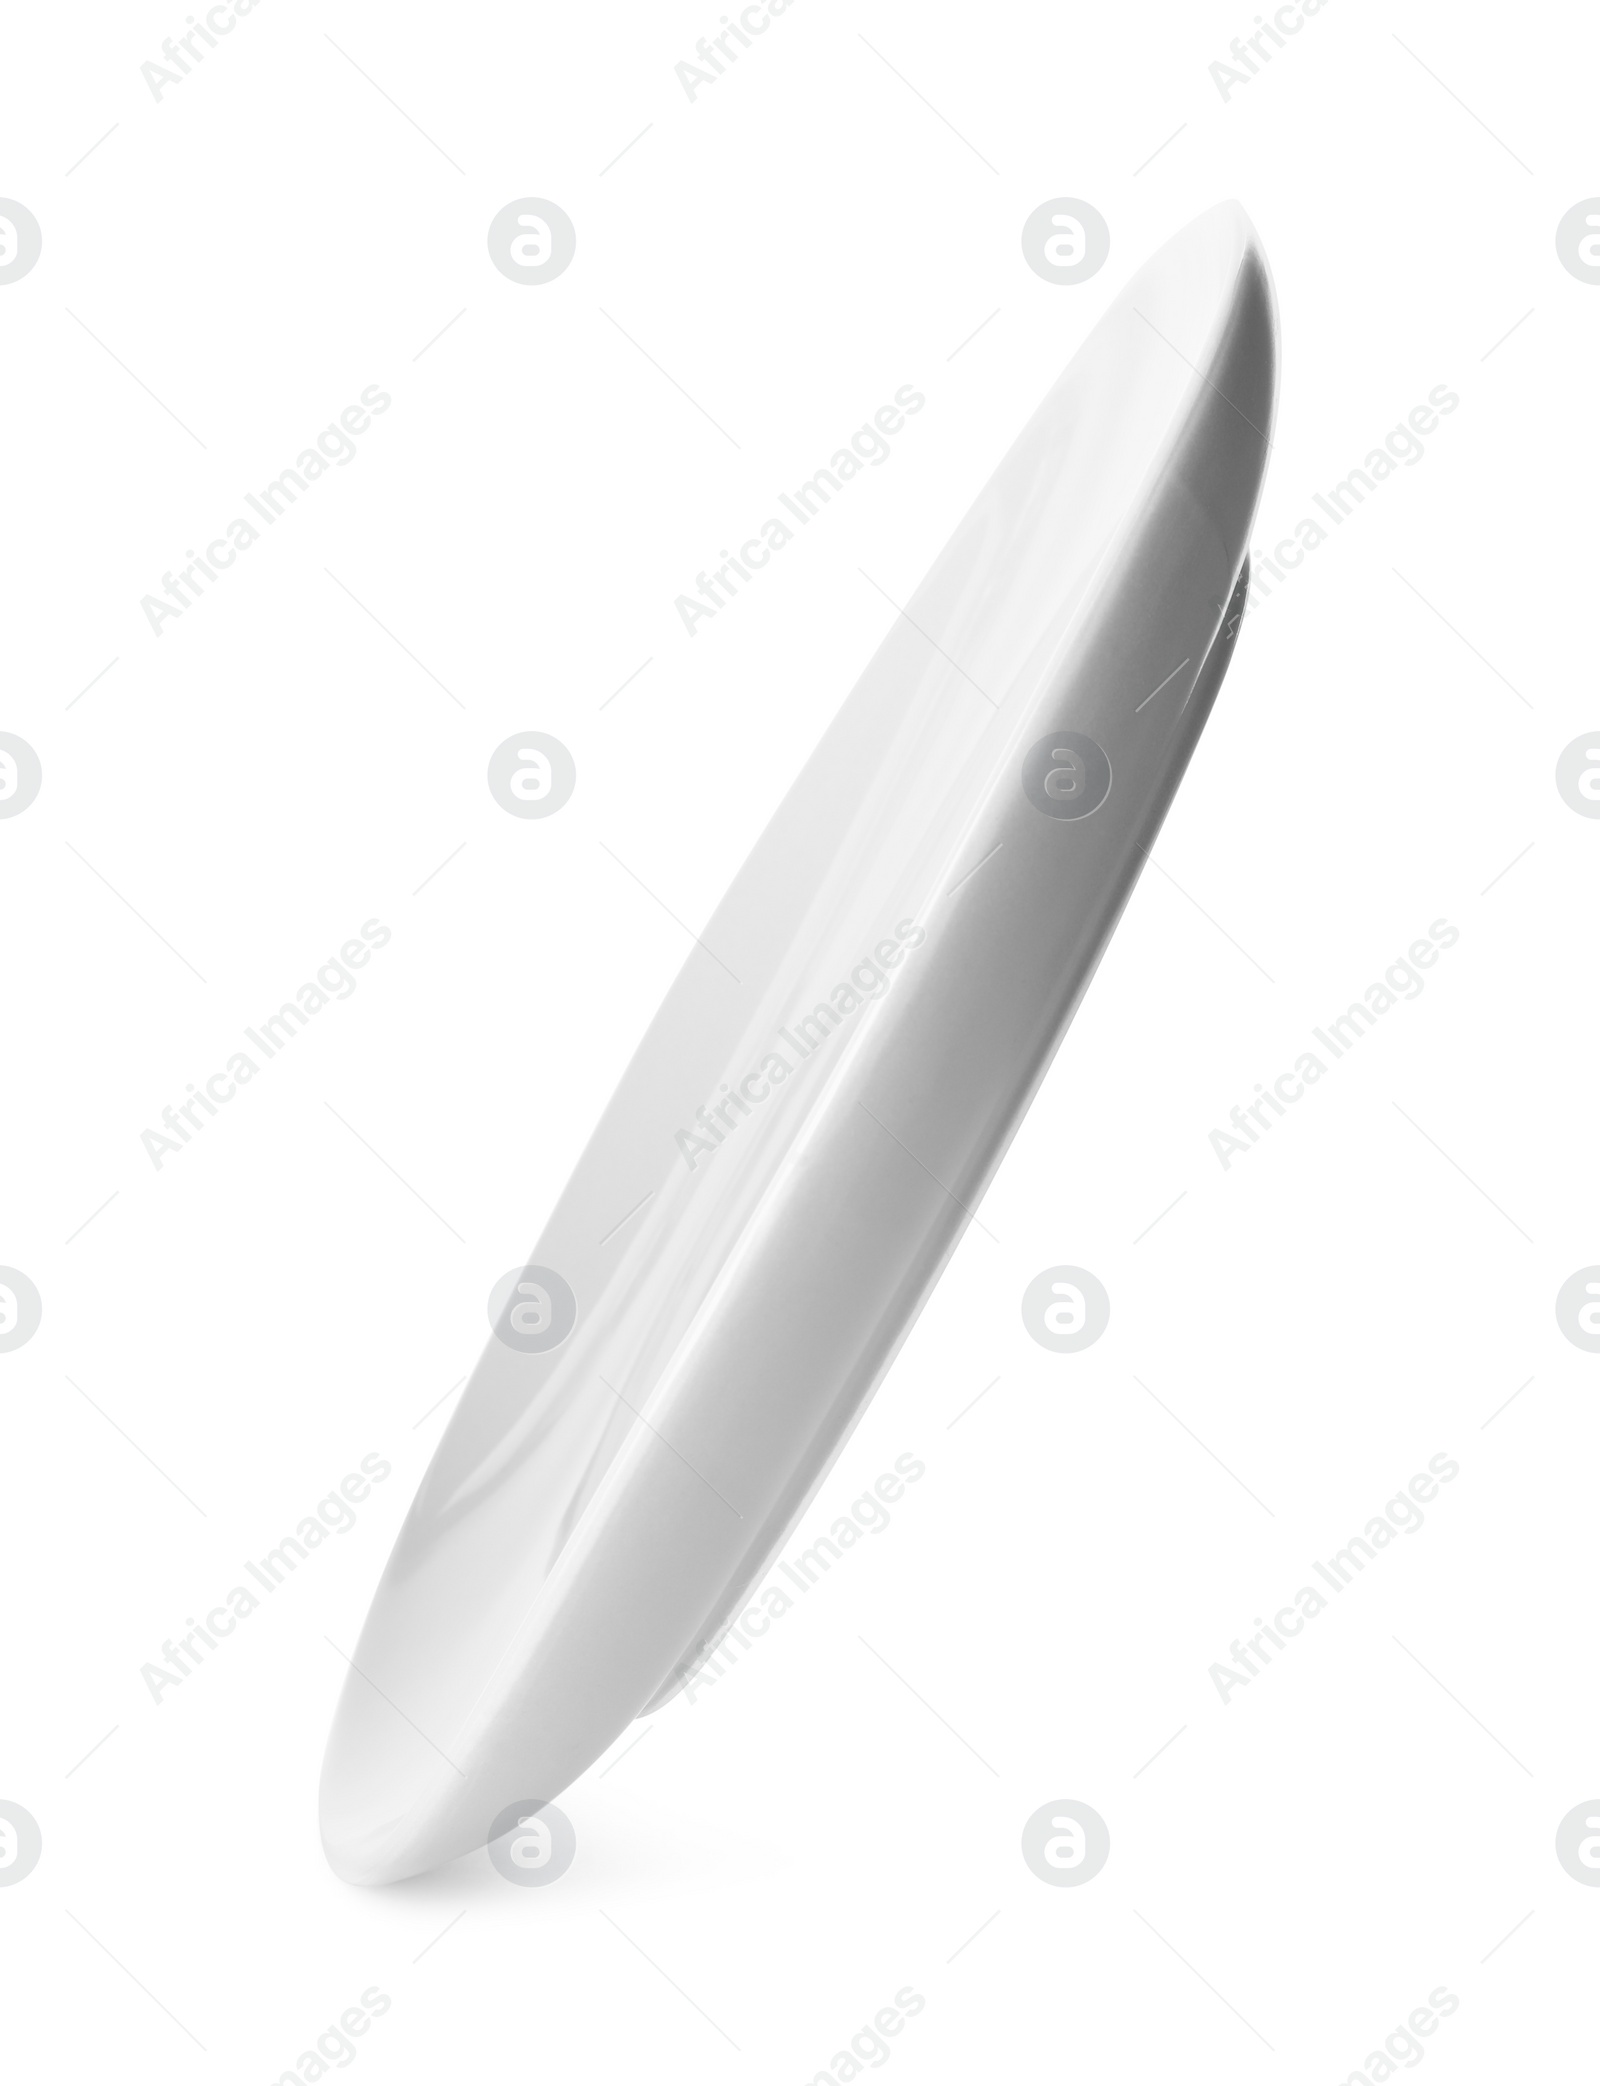 Photo of Clean empty grey plate isolated on white